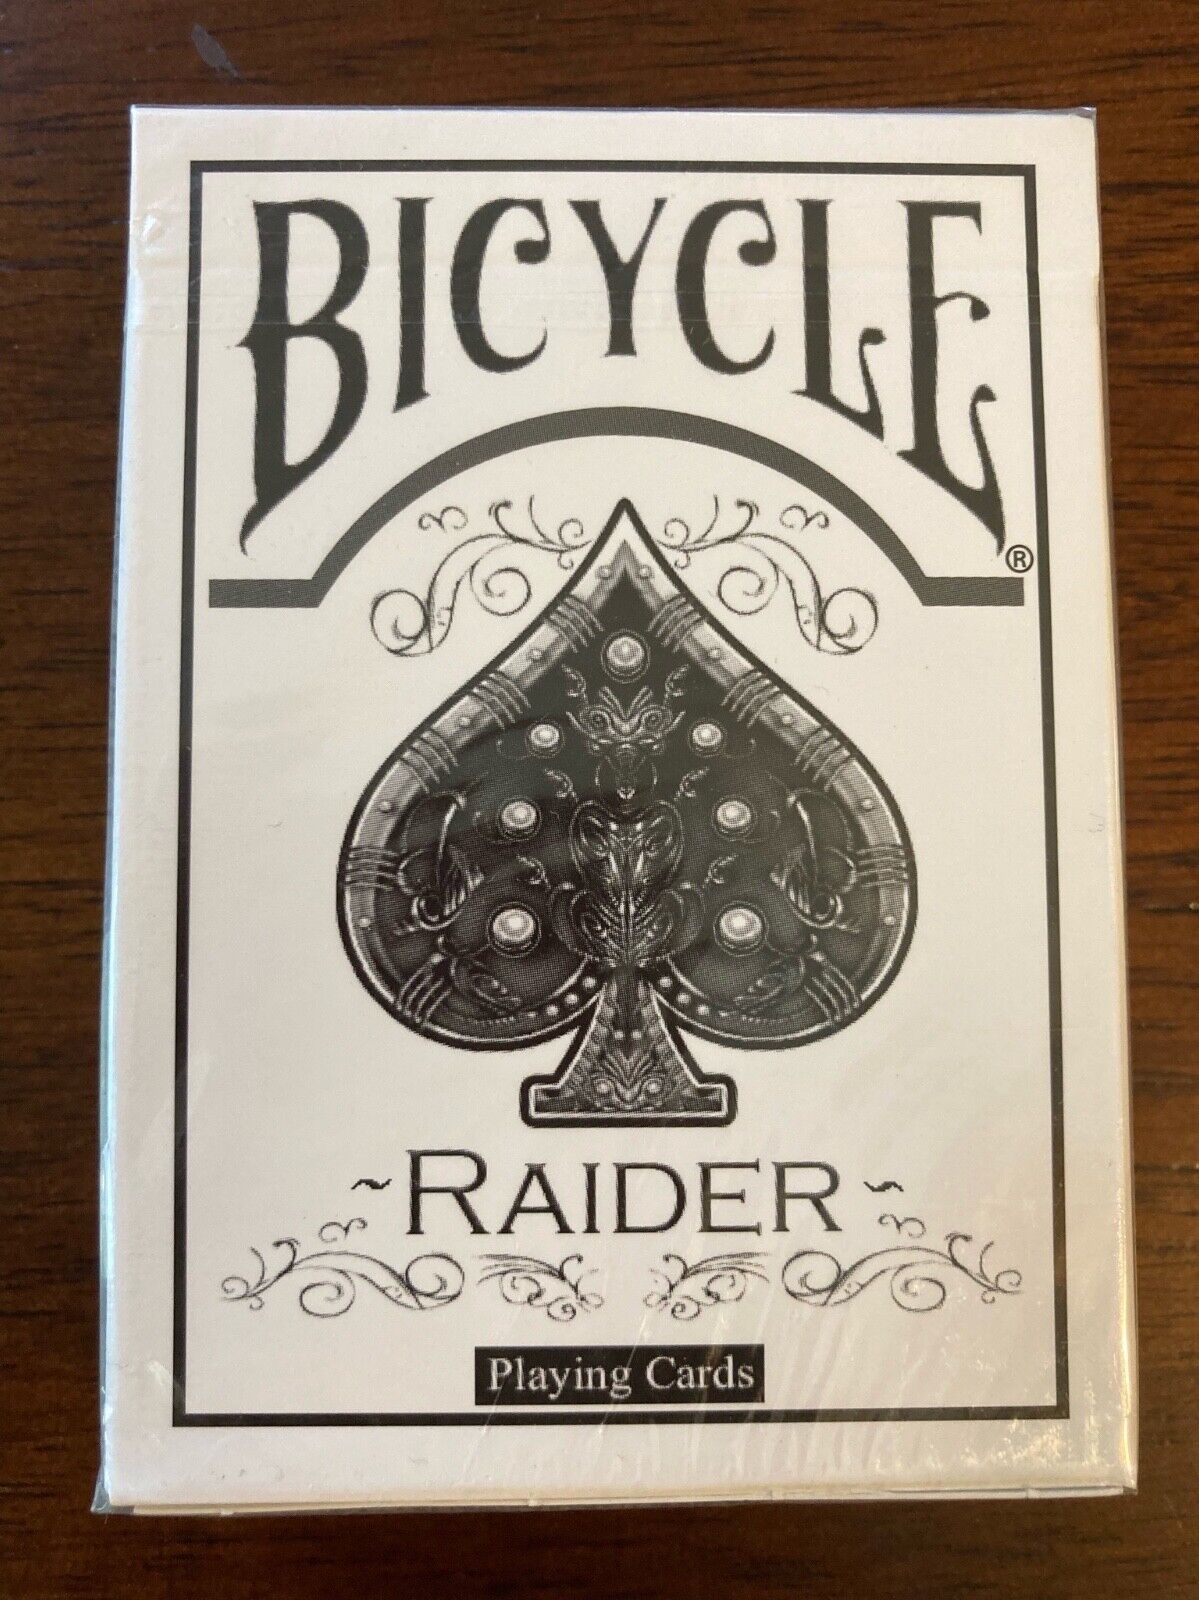 Bicycle Raider Playing Cards - White - Rare deck - 2009 printed by USPCC